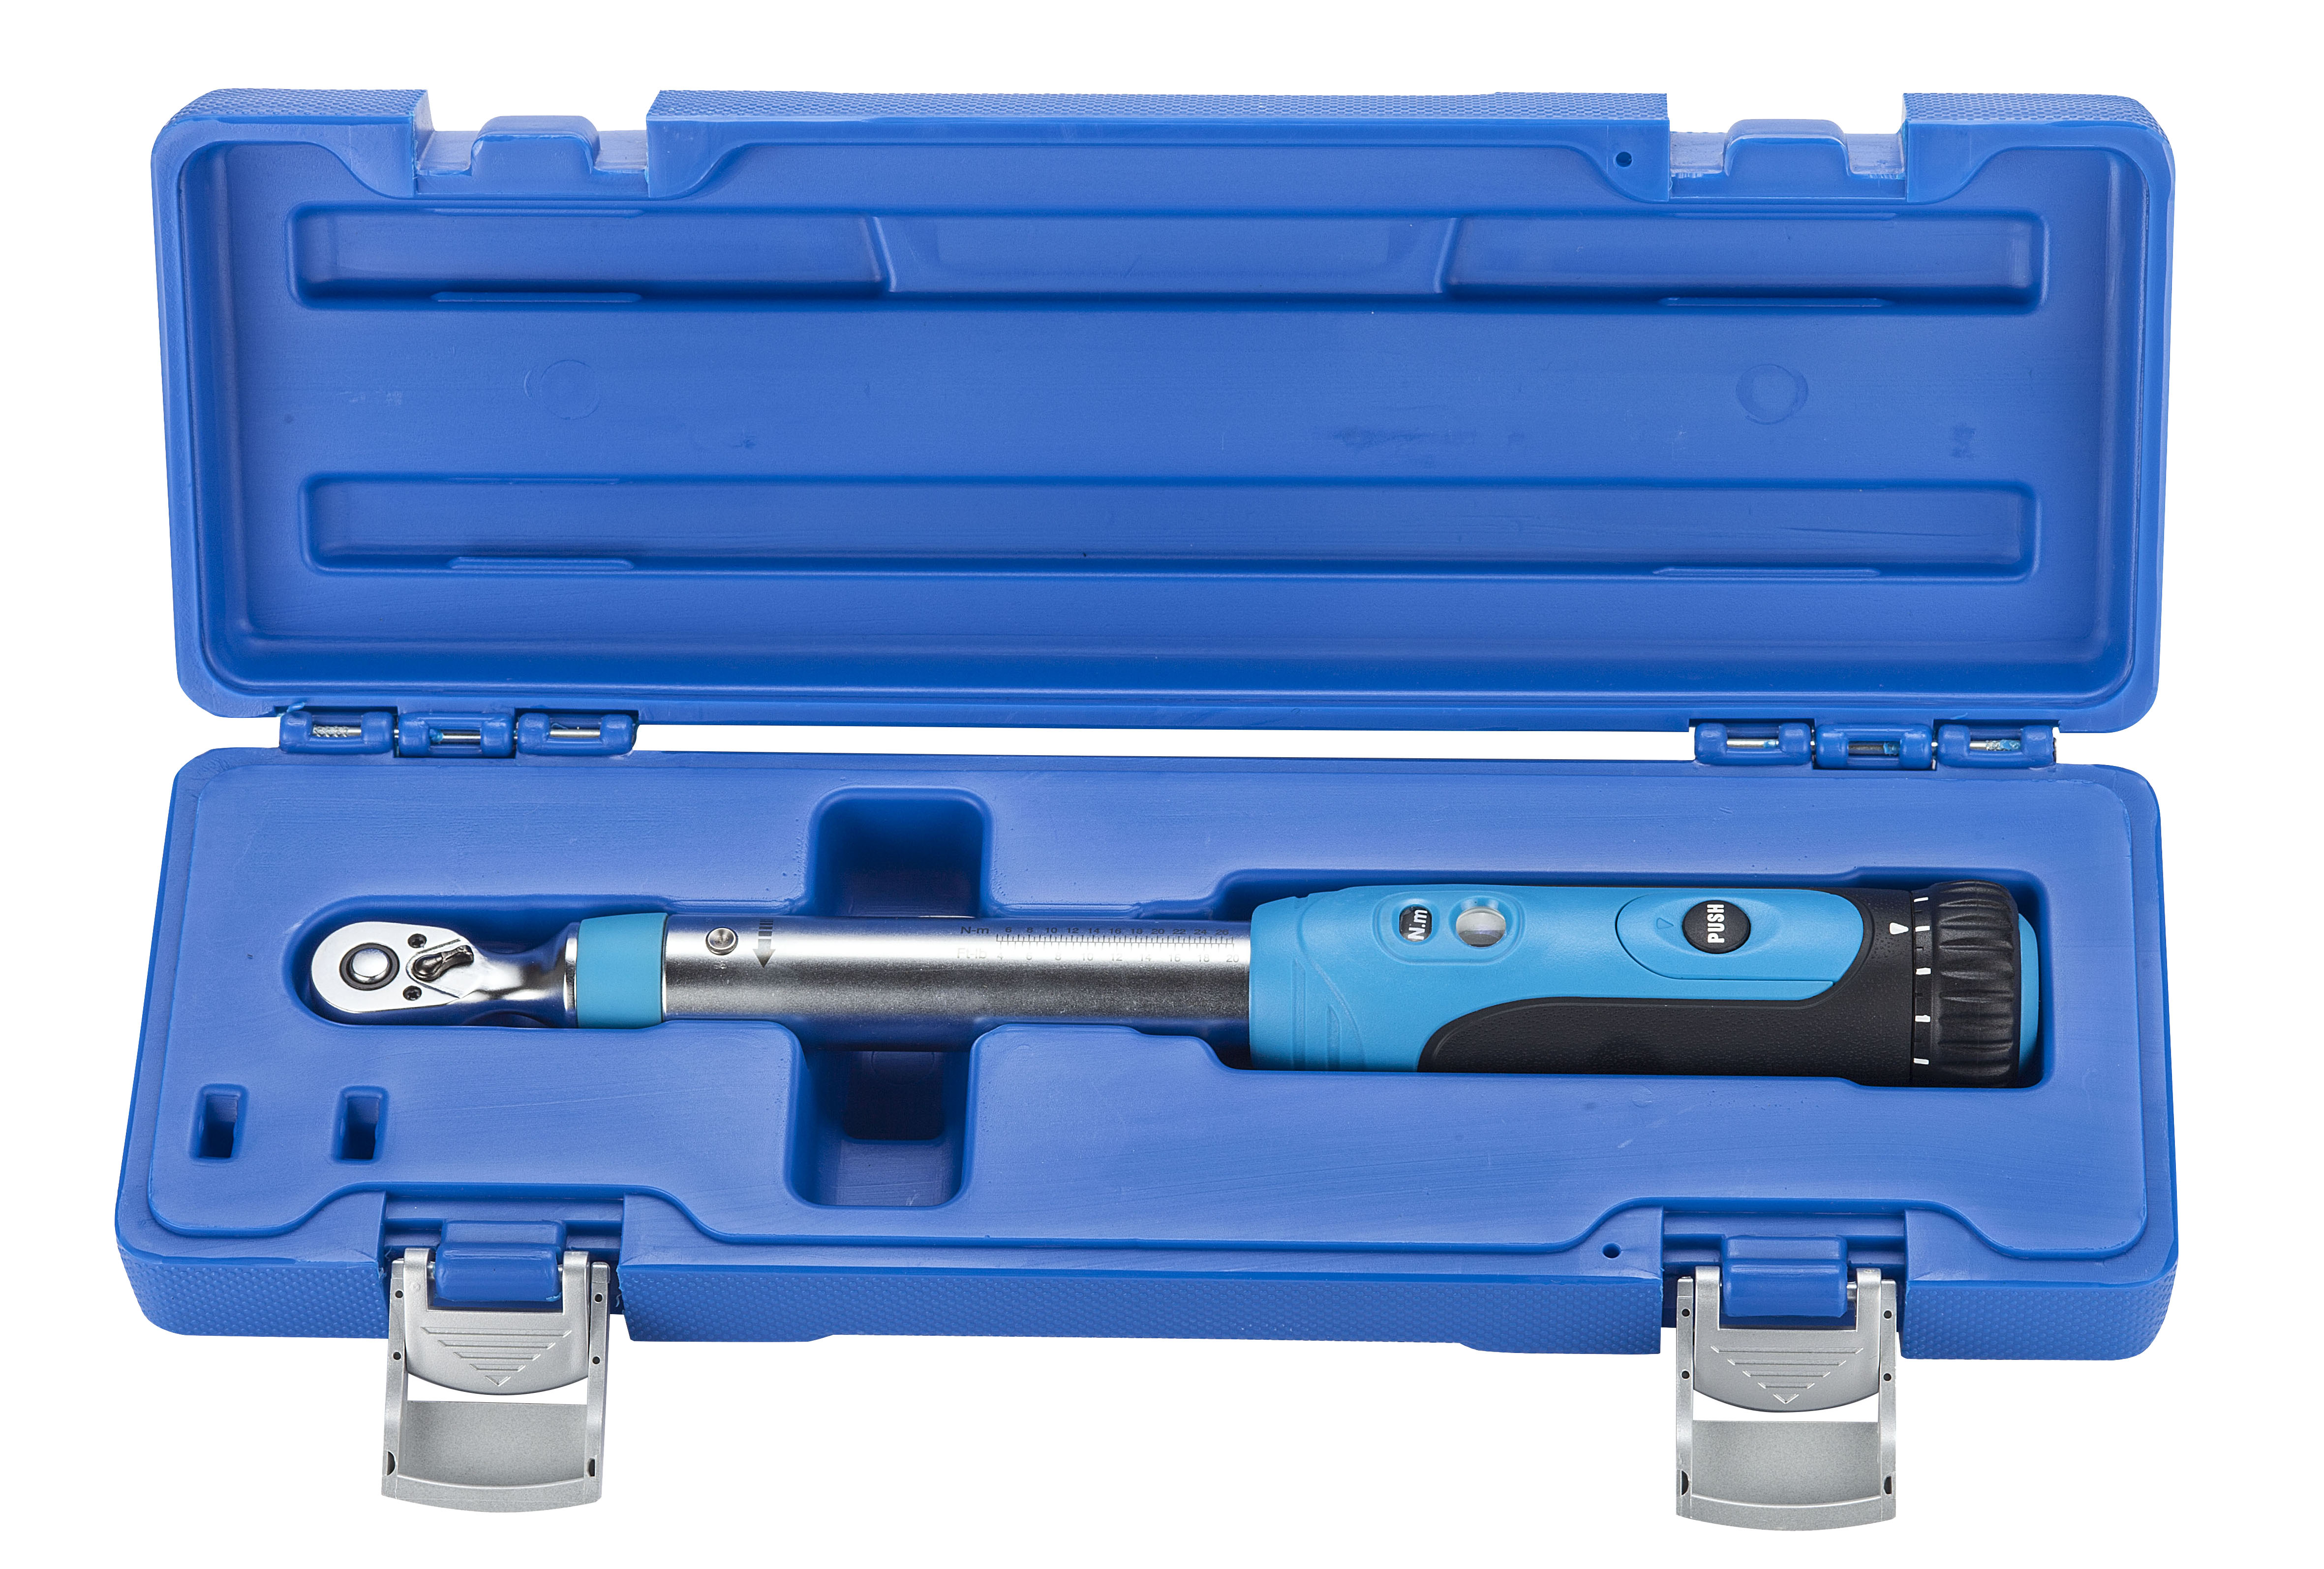 1/4"DR EP screen adjustable torque wrench